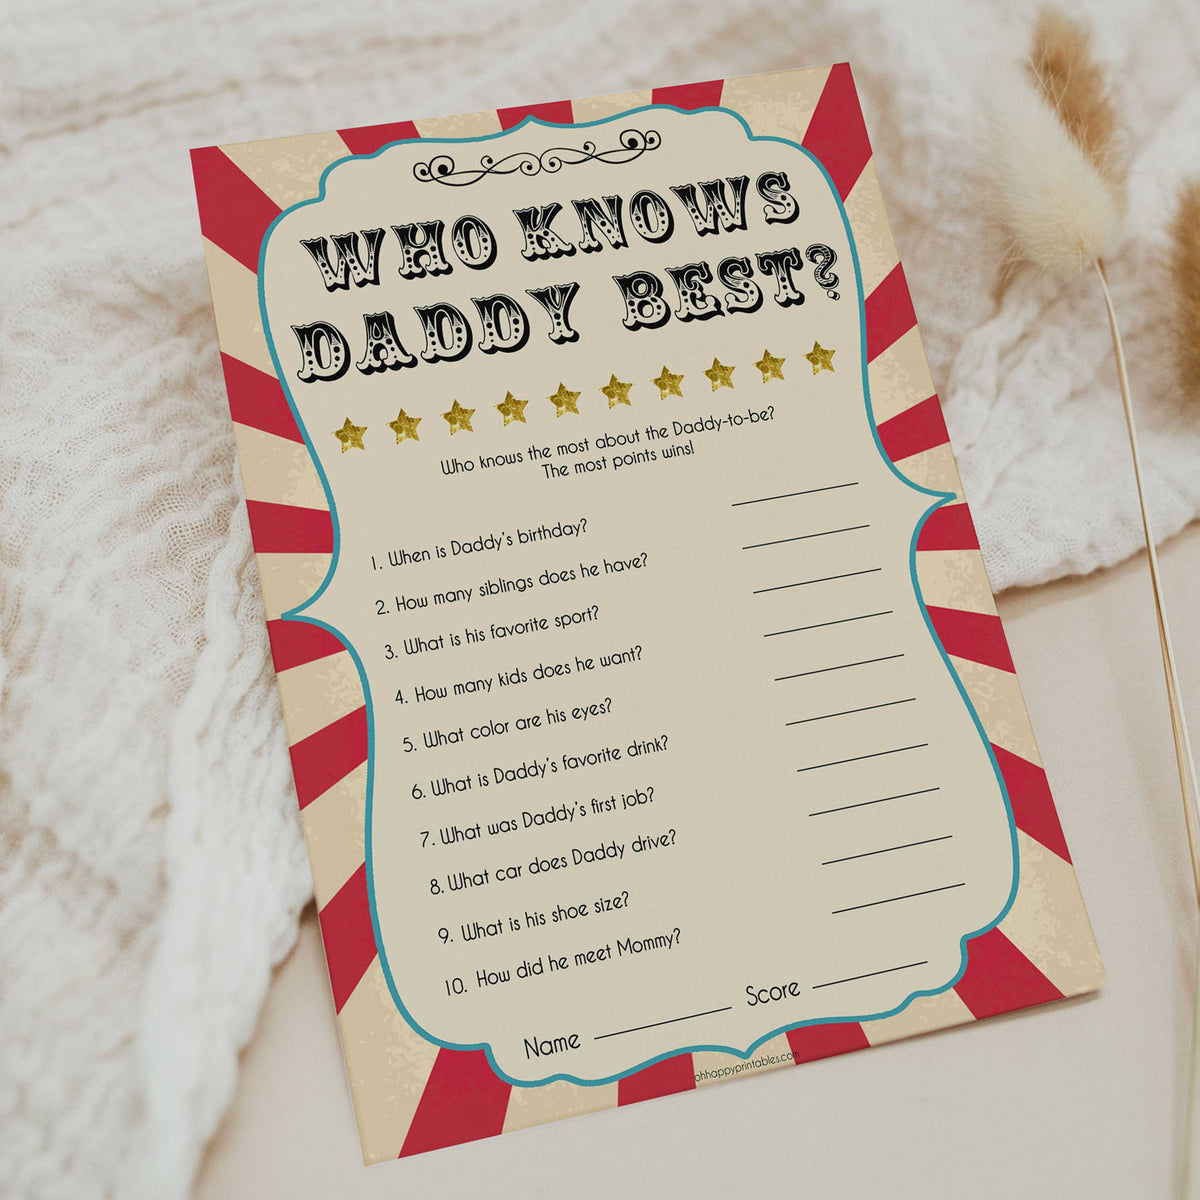 Circus who knows daddy best baby shower games, circus baby games, carnival baby games, printable baby games, fun baby games, popular baby games, carnival baby shower, carnival theme